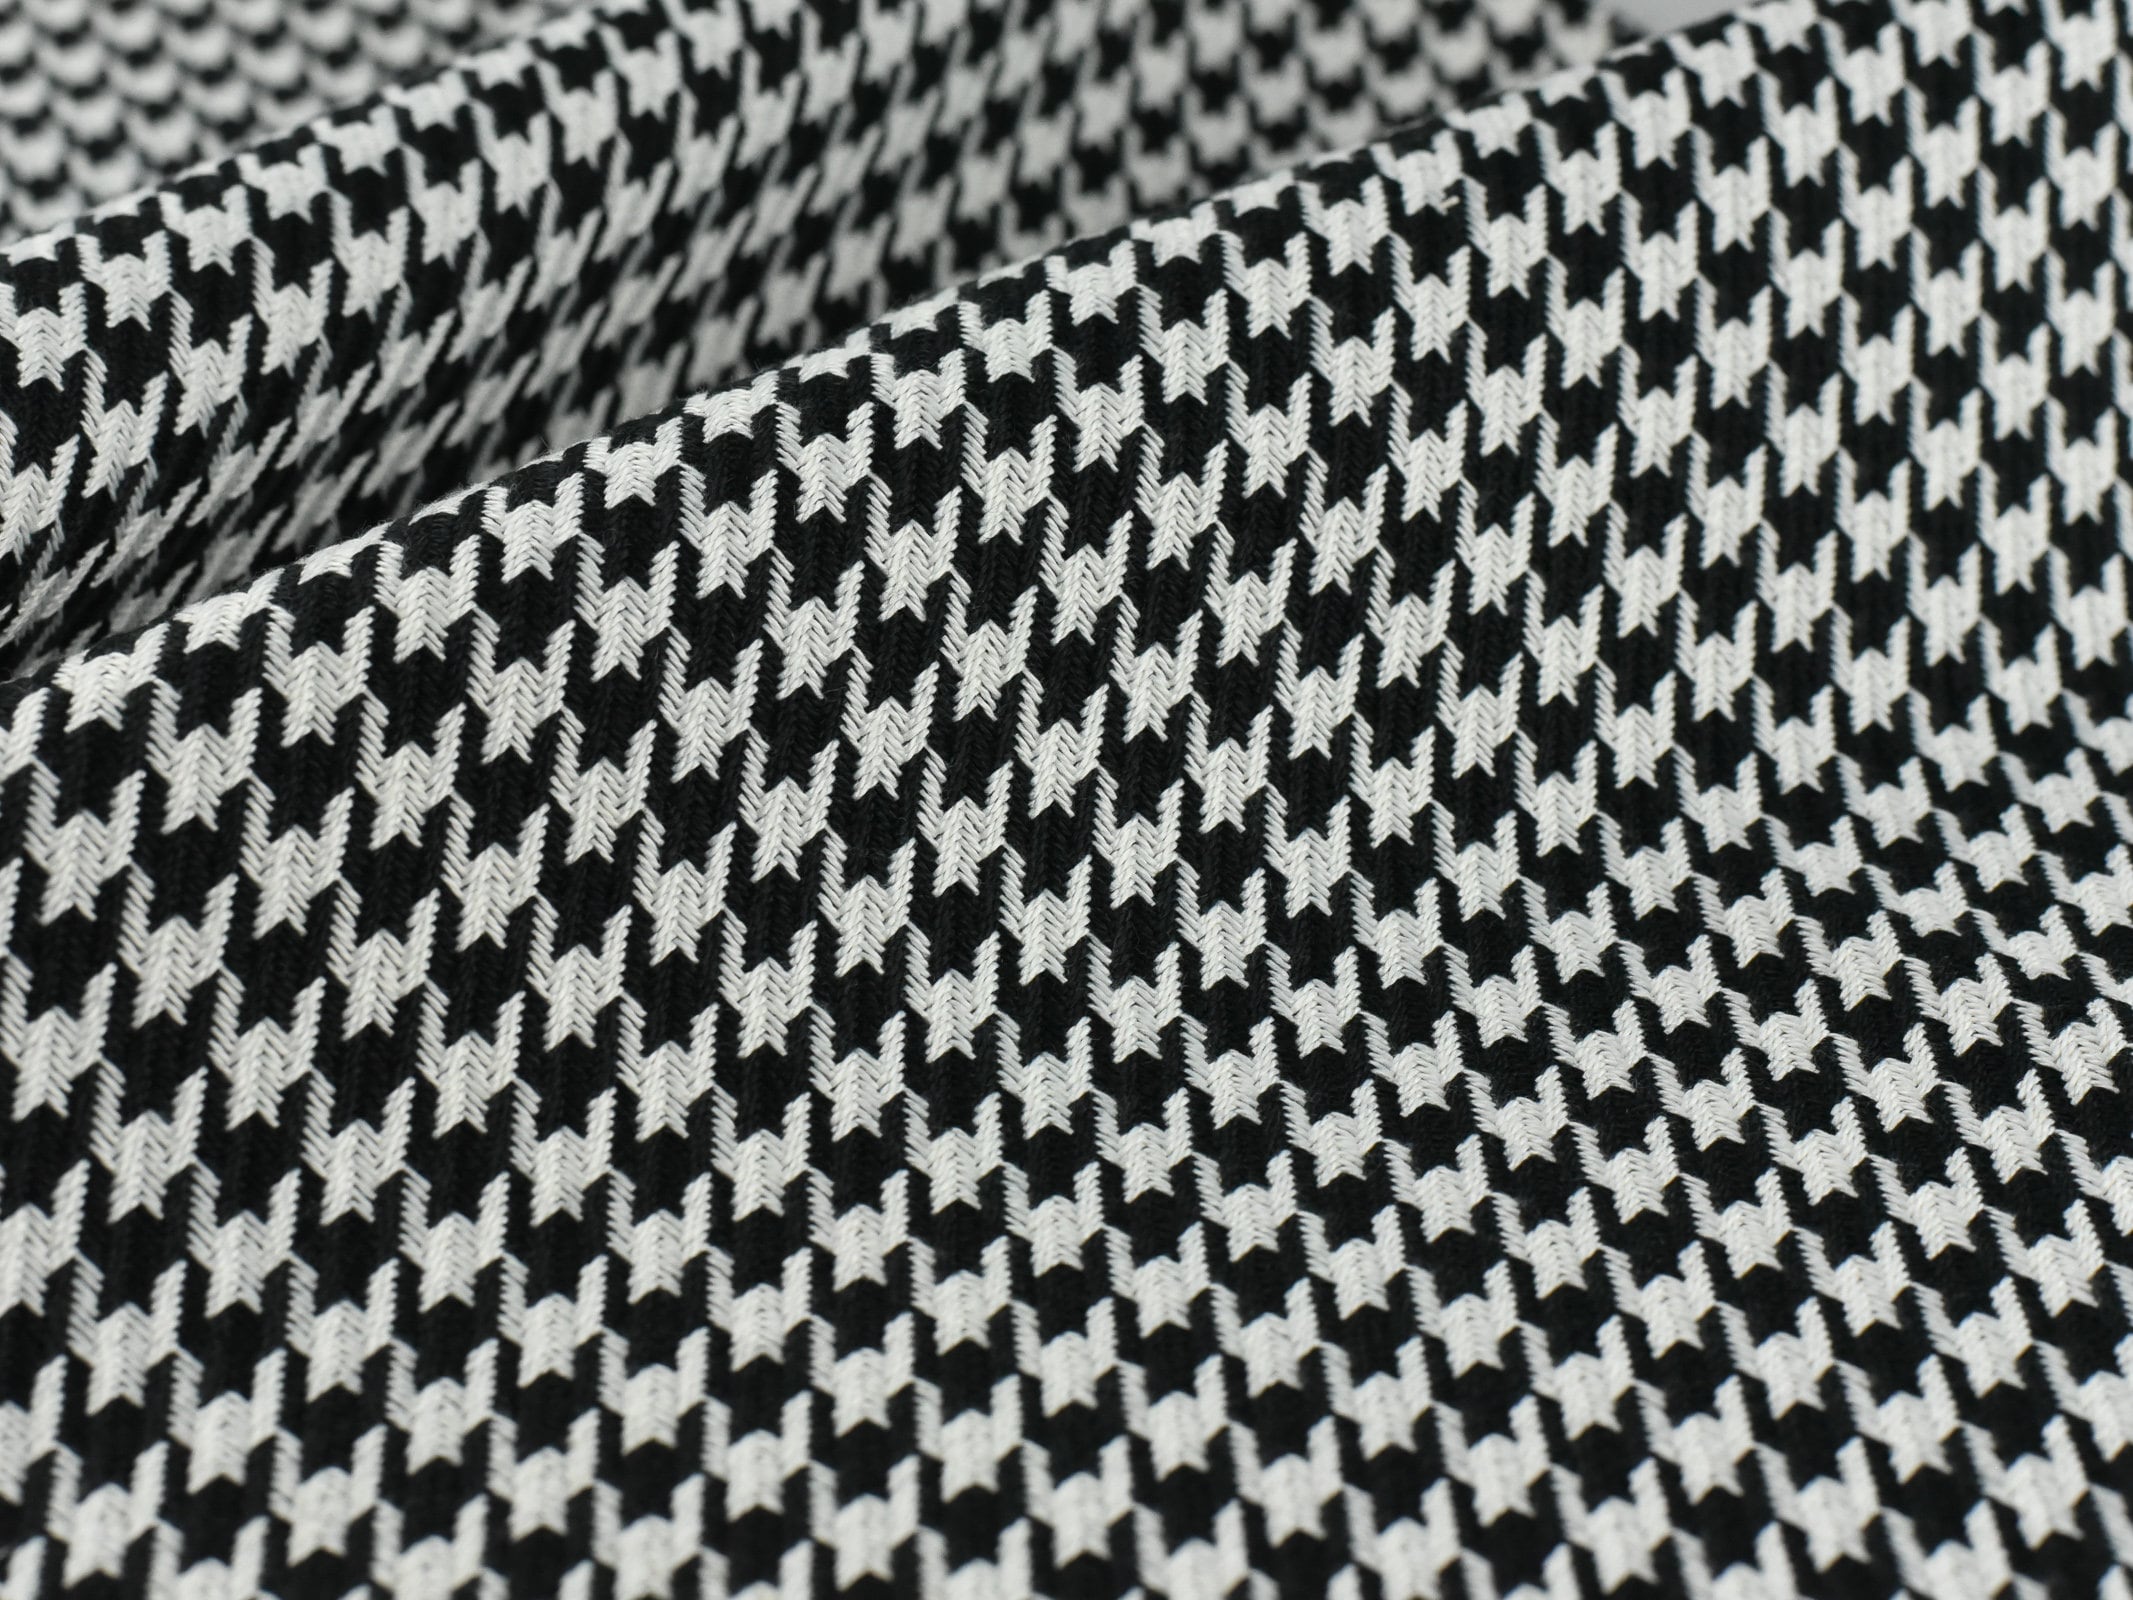 Spoonflower Fabric - Houndstooth, Black, White, Classic, Geometric, Monochrome Printed on Petal Signature Cotton Fabric by The Yard - Sewing Quilting